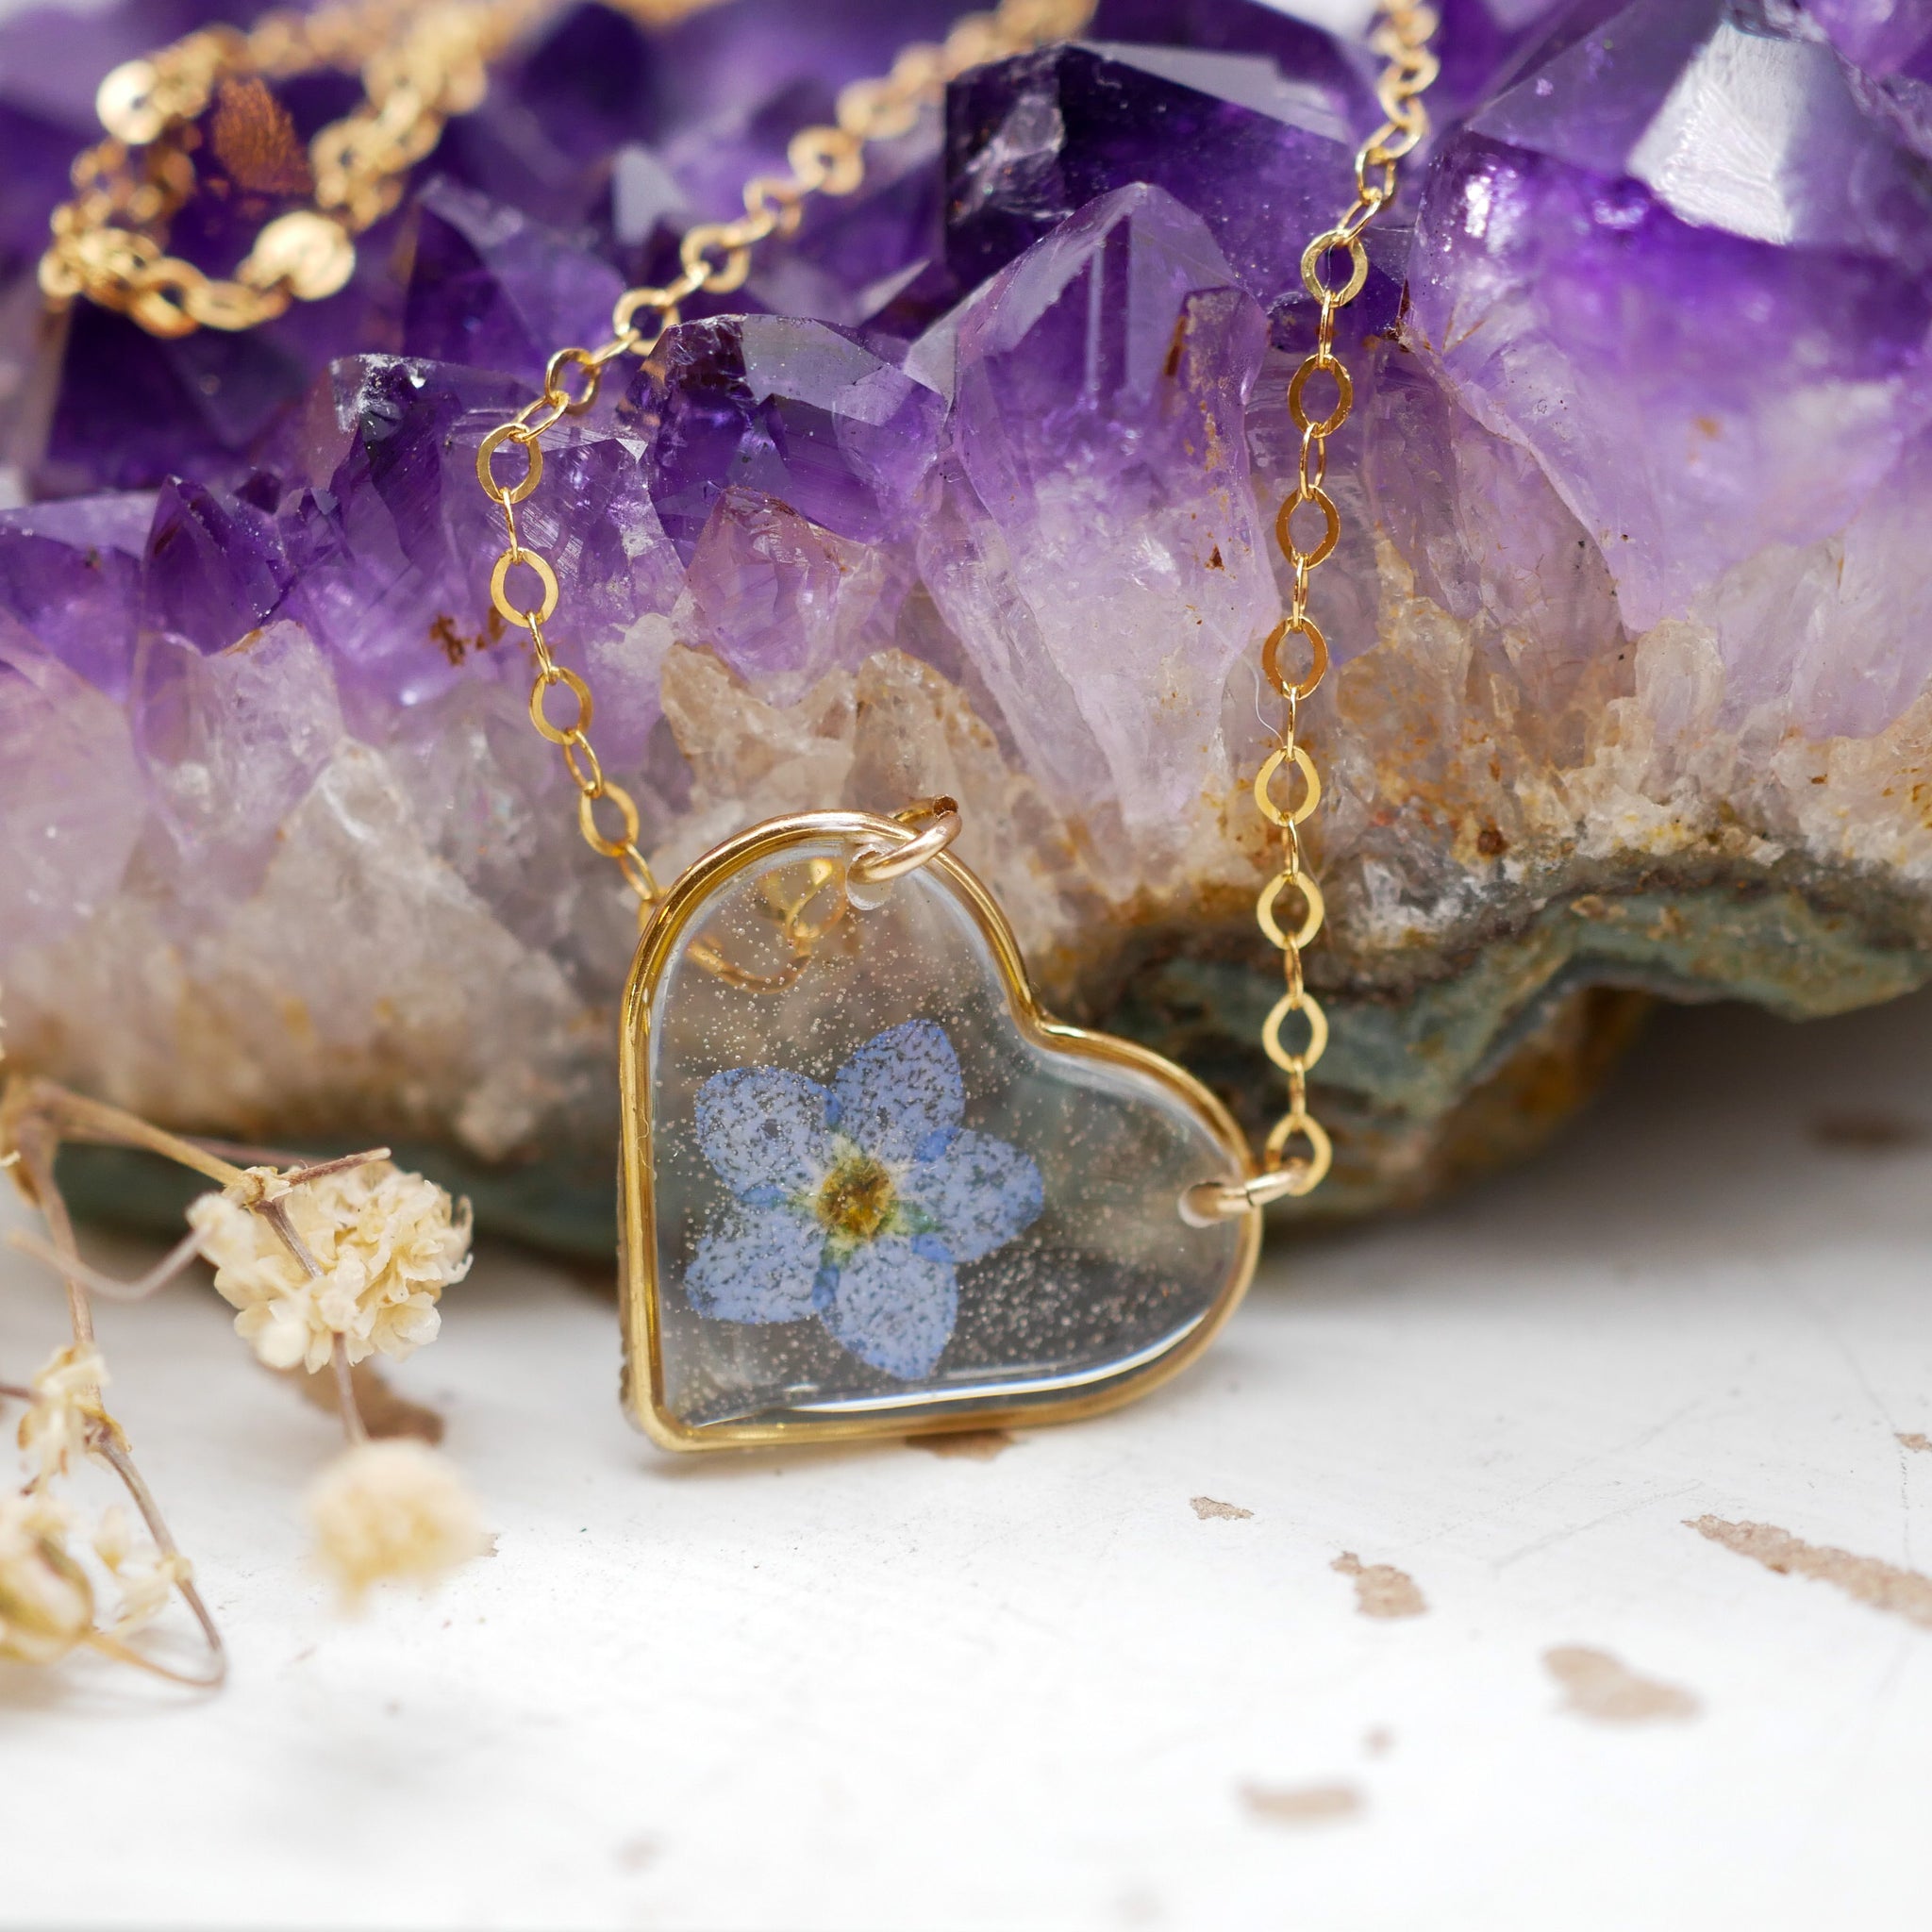 Forget me not heart necklace